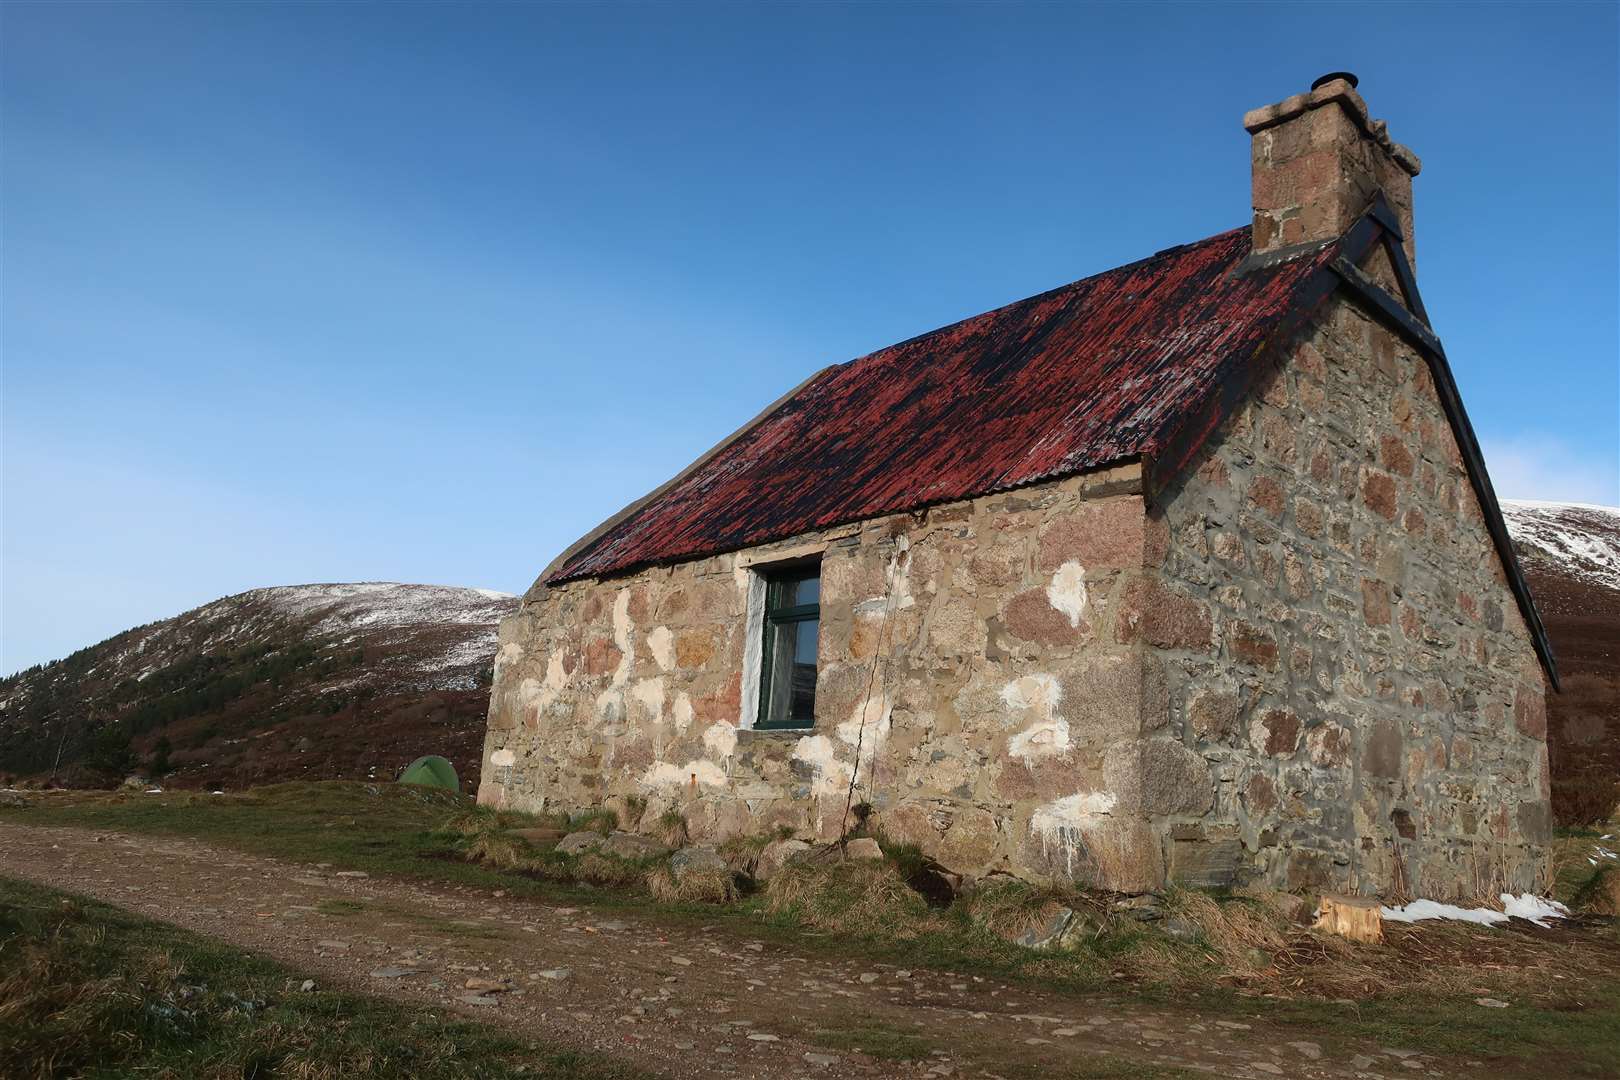 Ryvoan bothy with the campers' tent beyond.